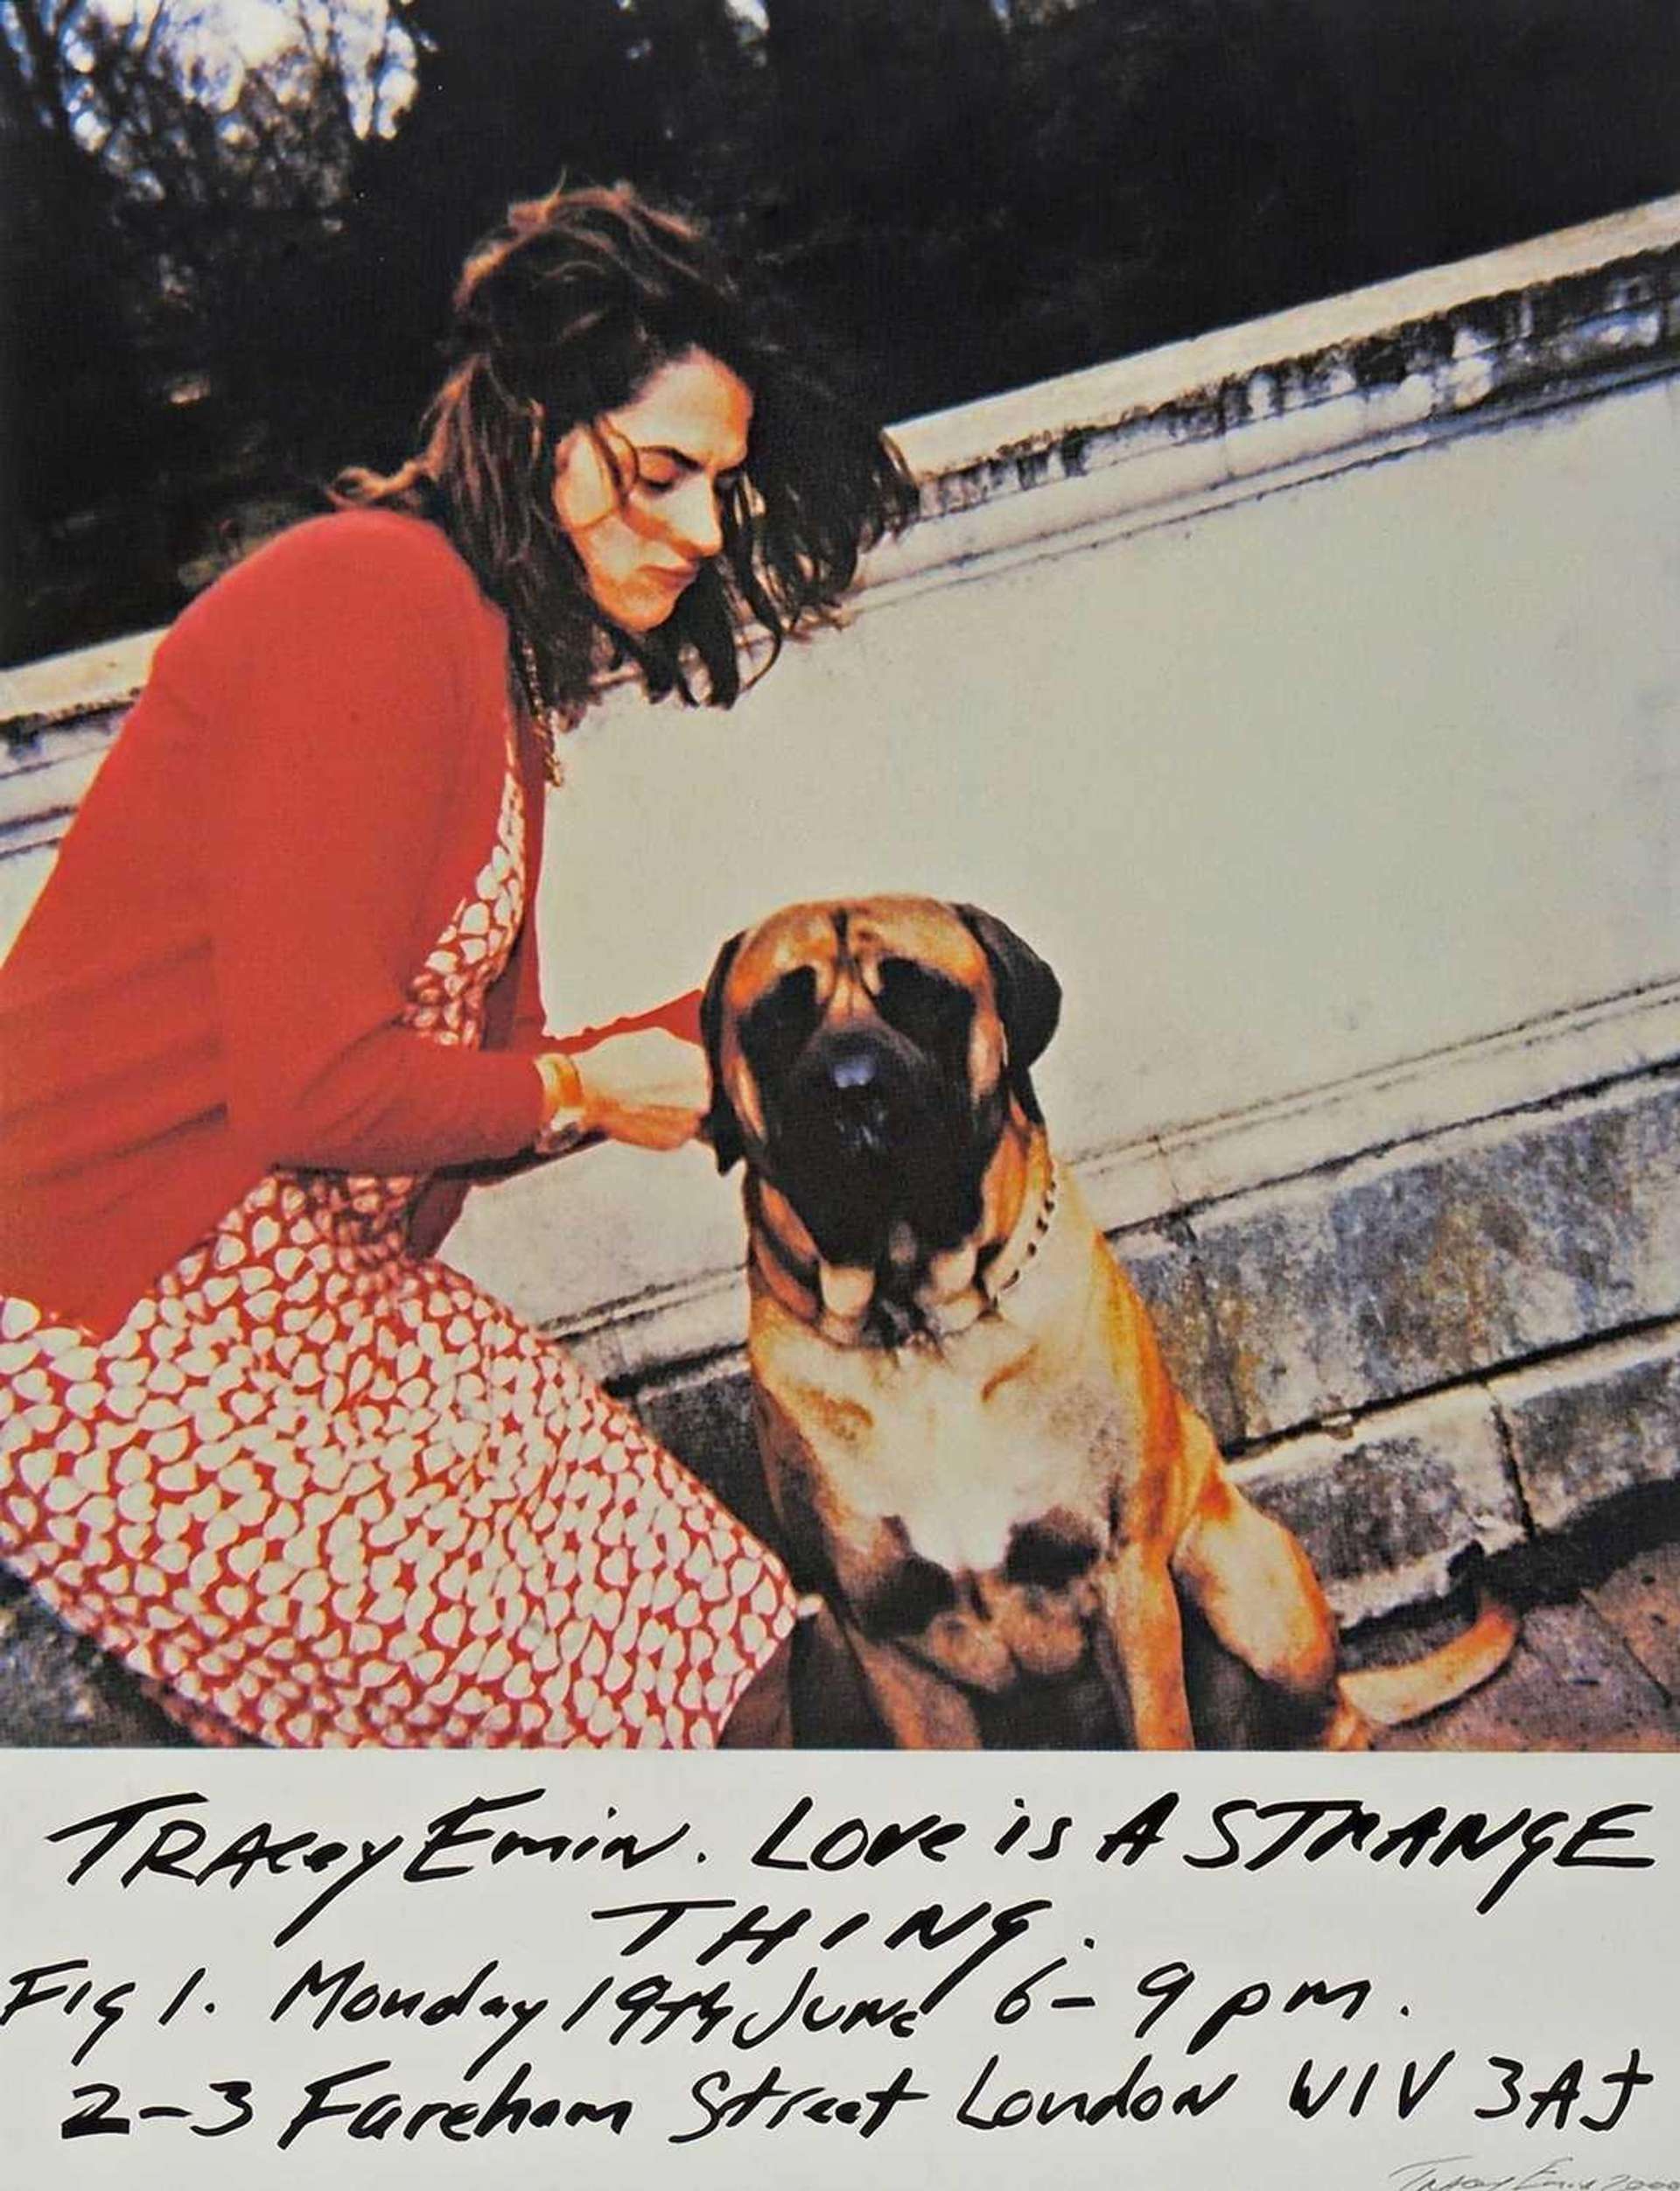 Tracey Emin’s Love Is A Strange Thing. A Polaroid style photo of woman in a red and white polka dot dress adjusting her dog’s collar.